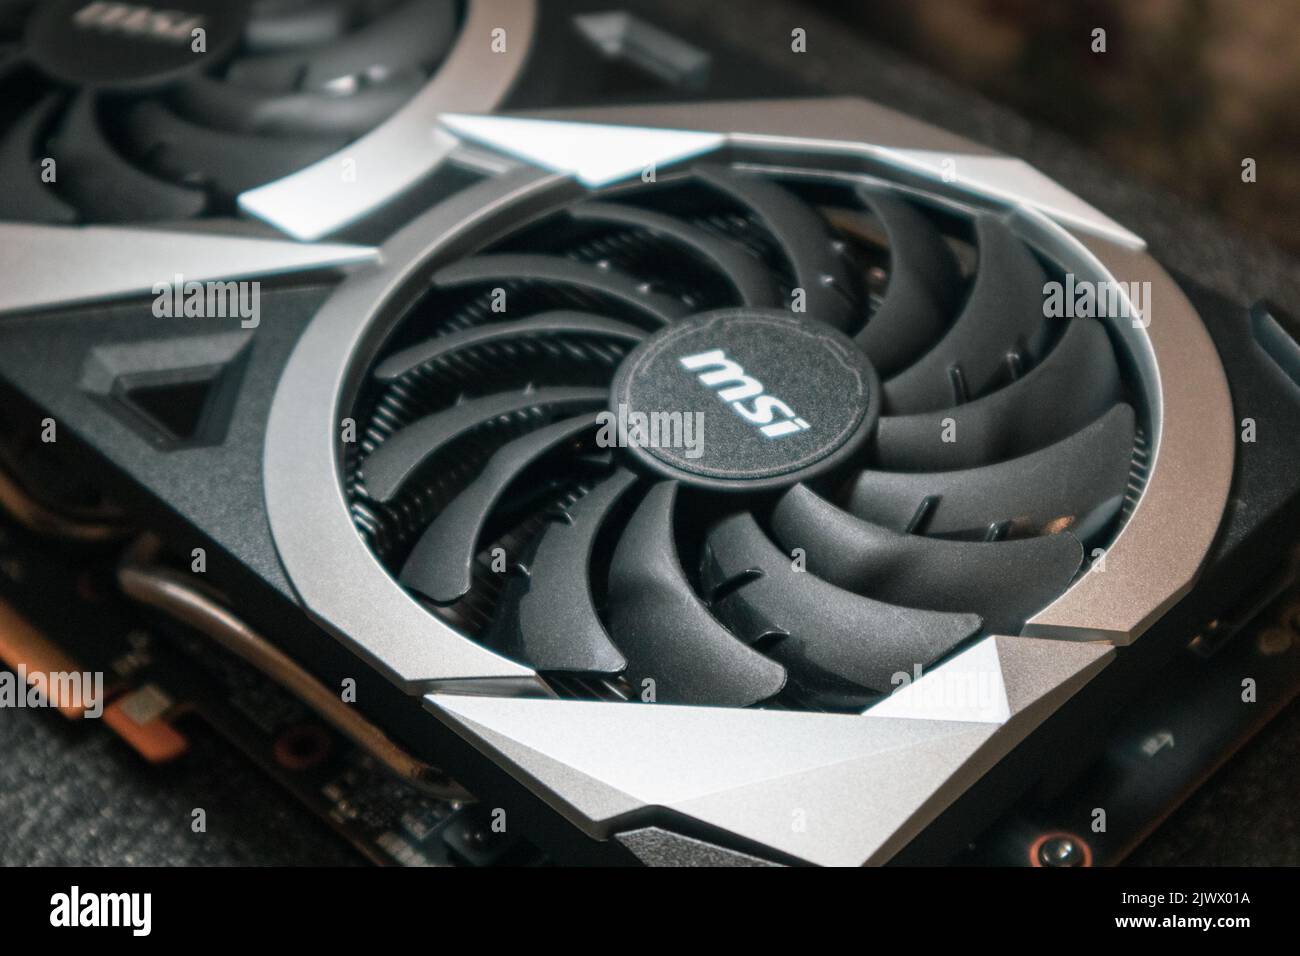 Kyiv, Ukraine - August 19, 2022: Cooler on MSI graphics card with AMD Radeon RX6700XT, close-up with selective focus, PC equipment details Stock Photo